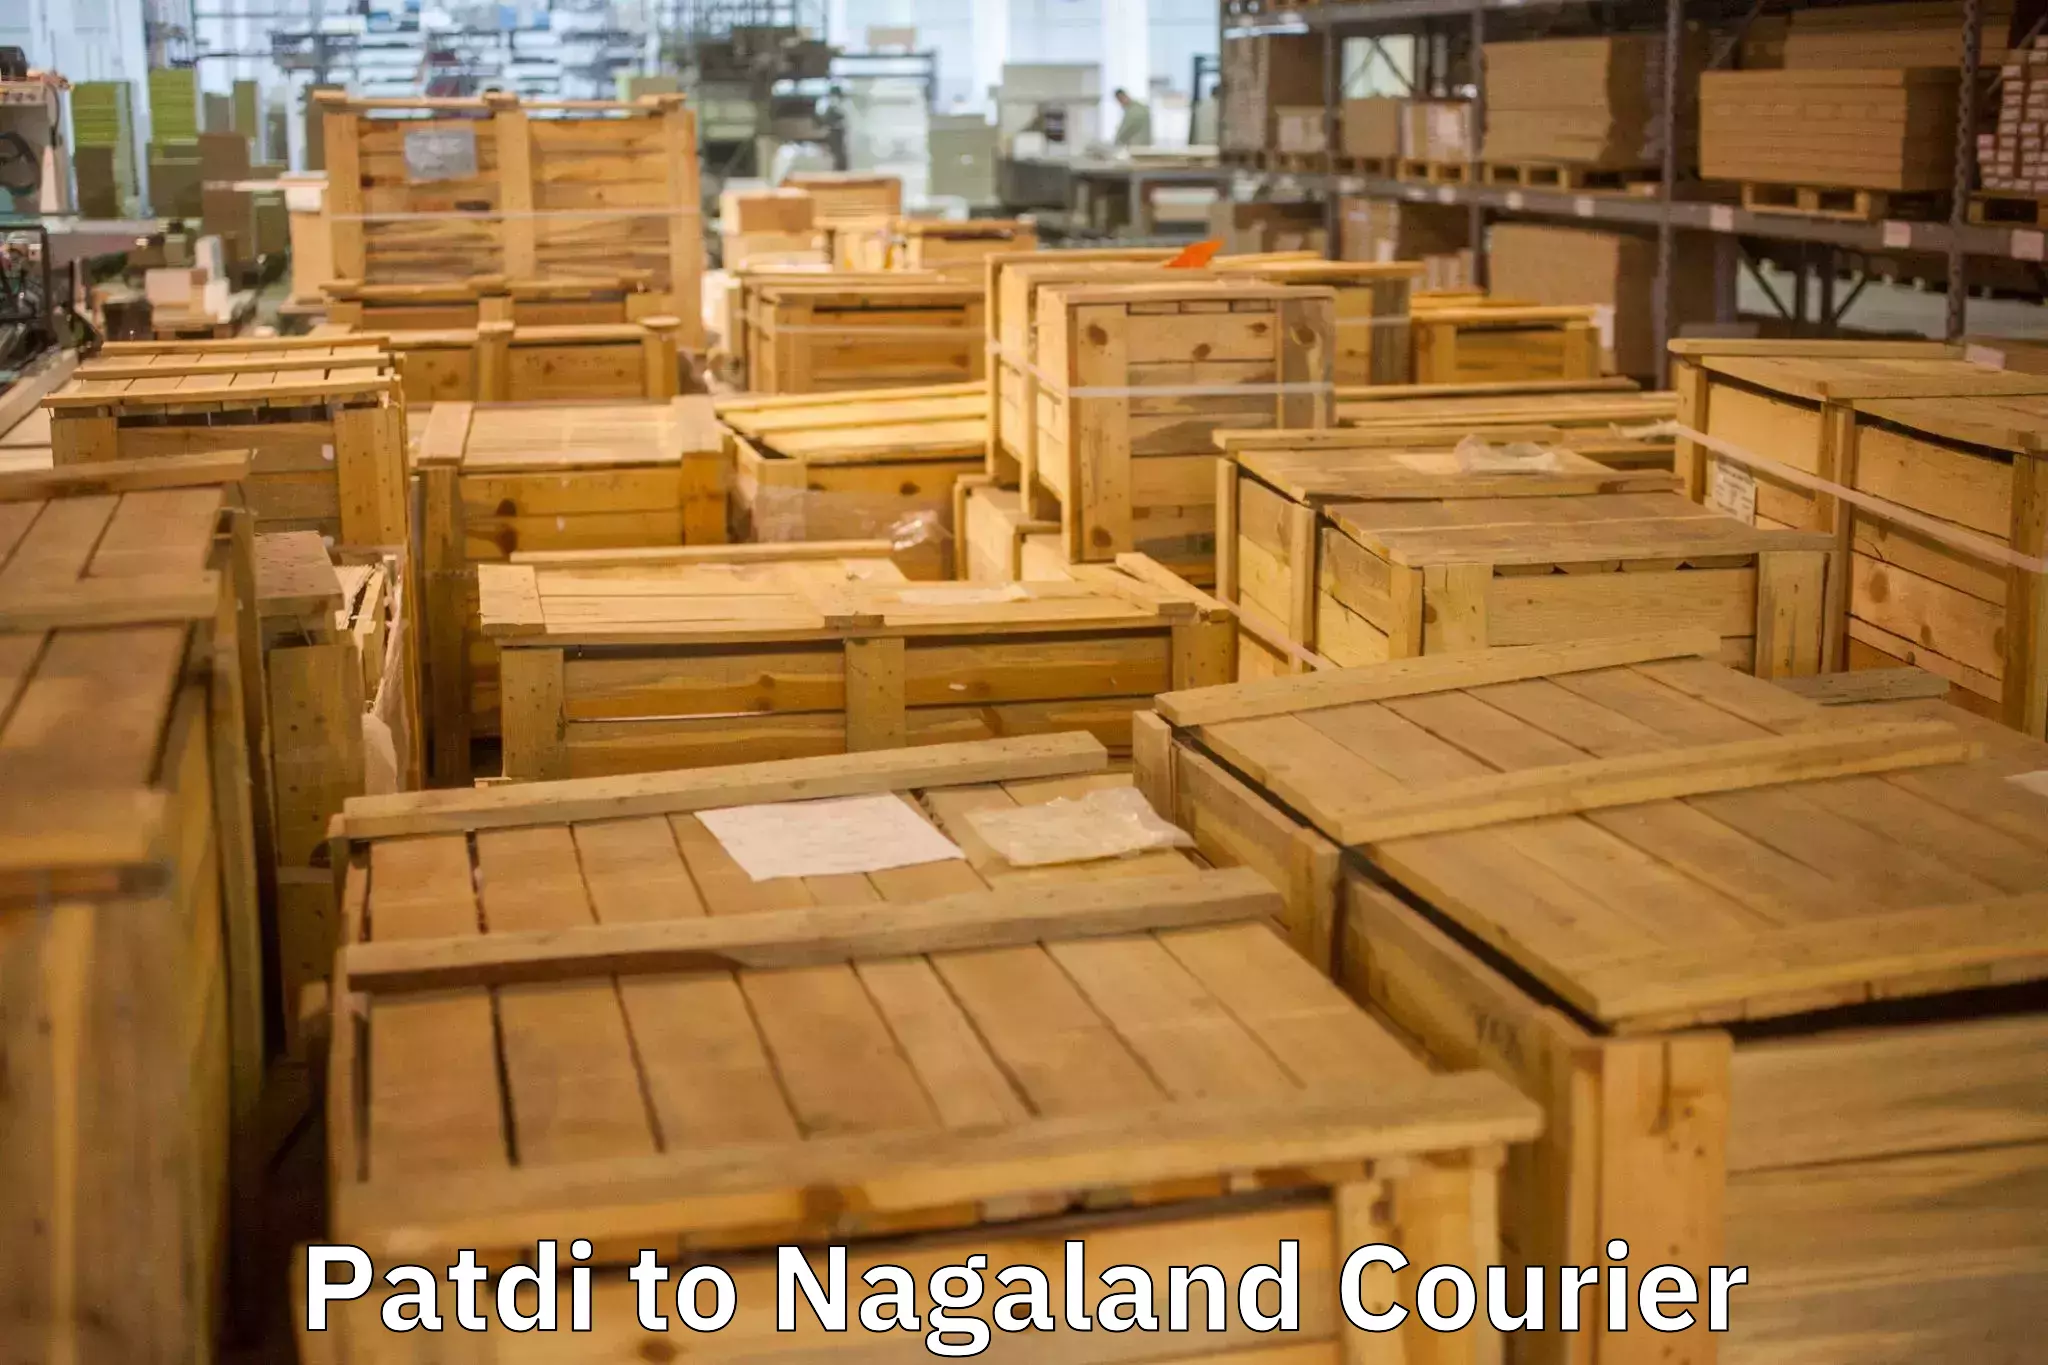 Professional movers and packers Patdi to Nagaland